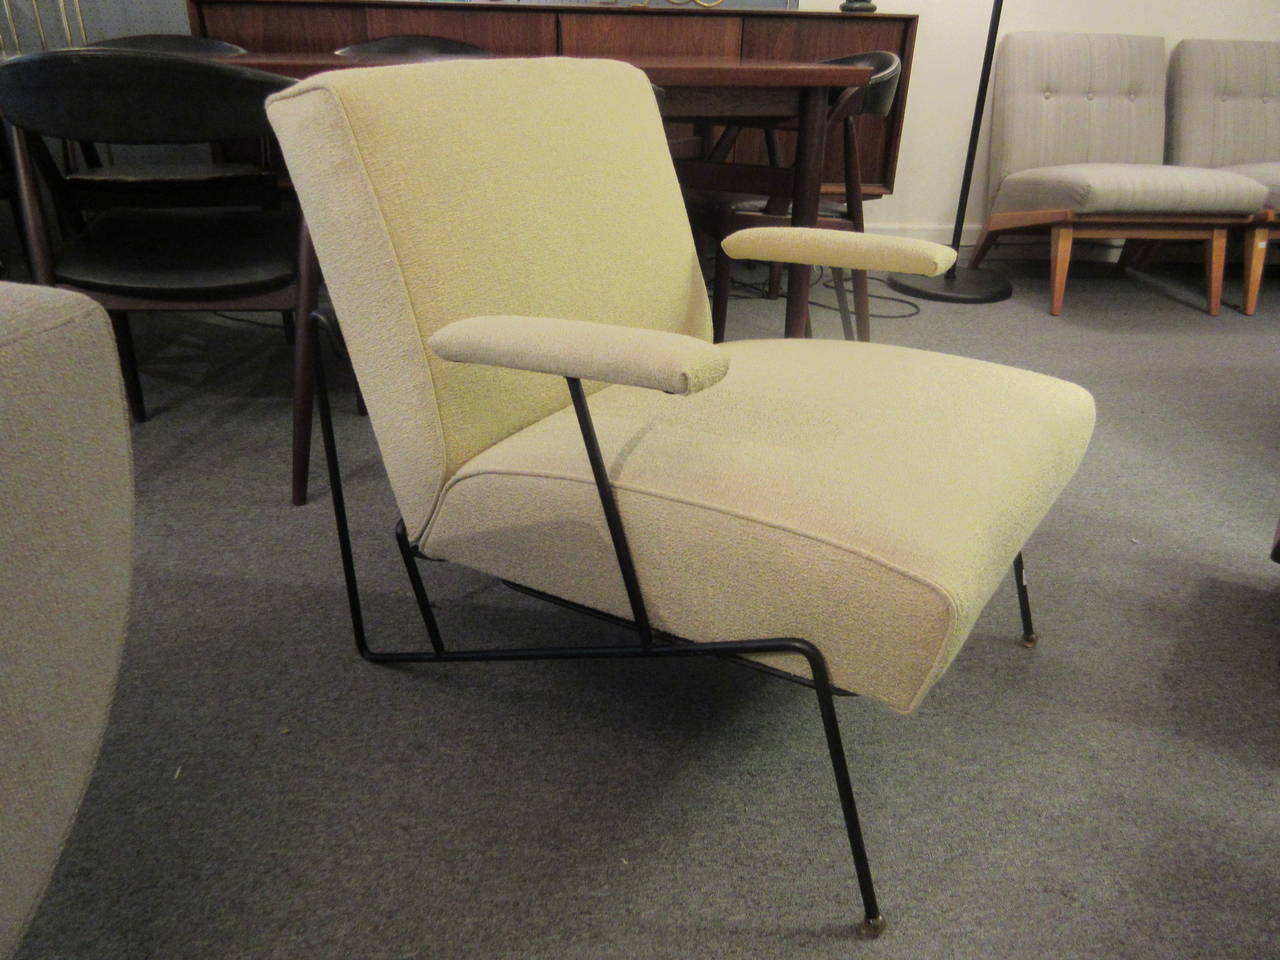 Comfortable armchair reupholstered in a celery colored weave. Chair retains original plastic spherical ball feet capping the angular wrought iron frame.